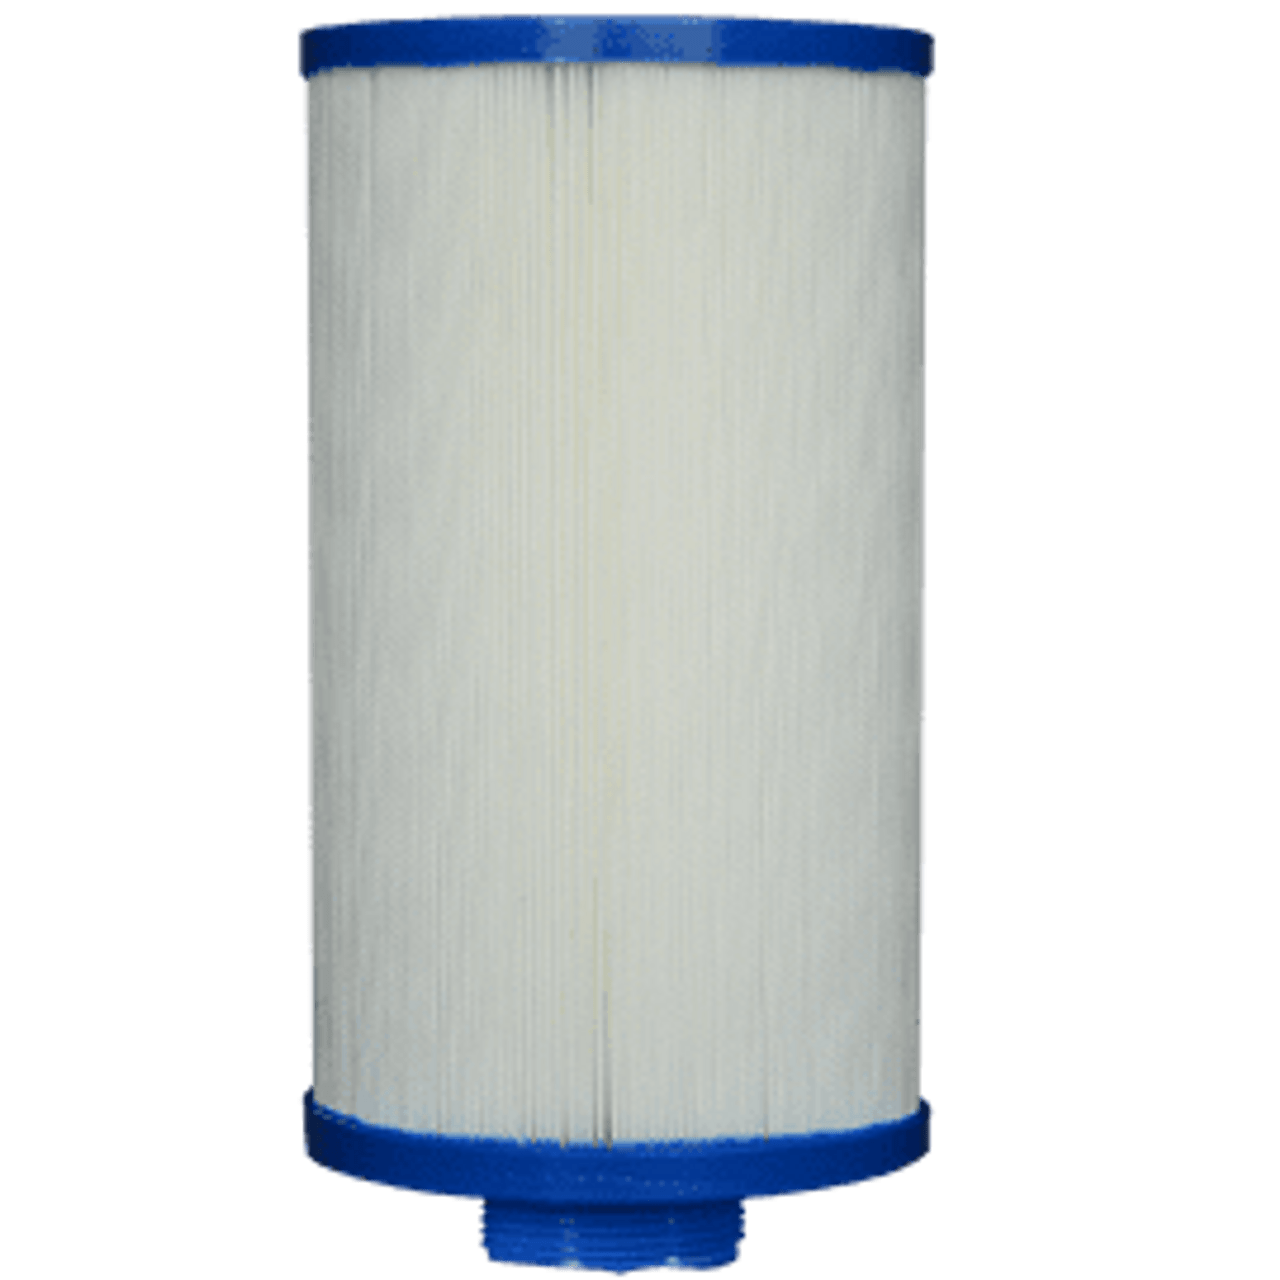 Pleatco PVT25N-P4 Filter Cartridge Replaces FC-0186